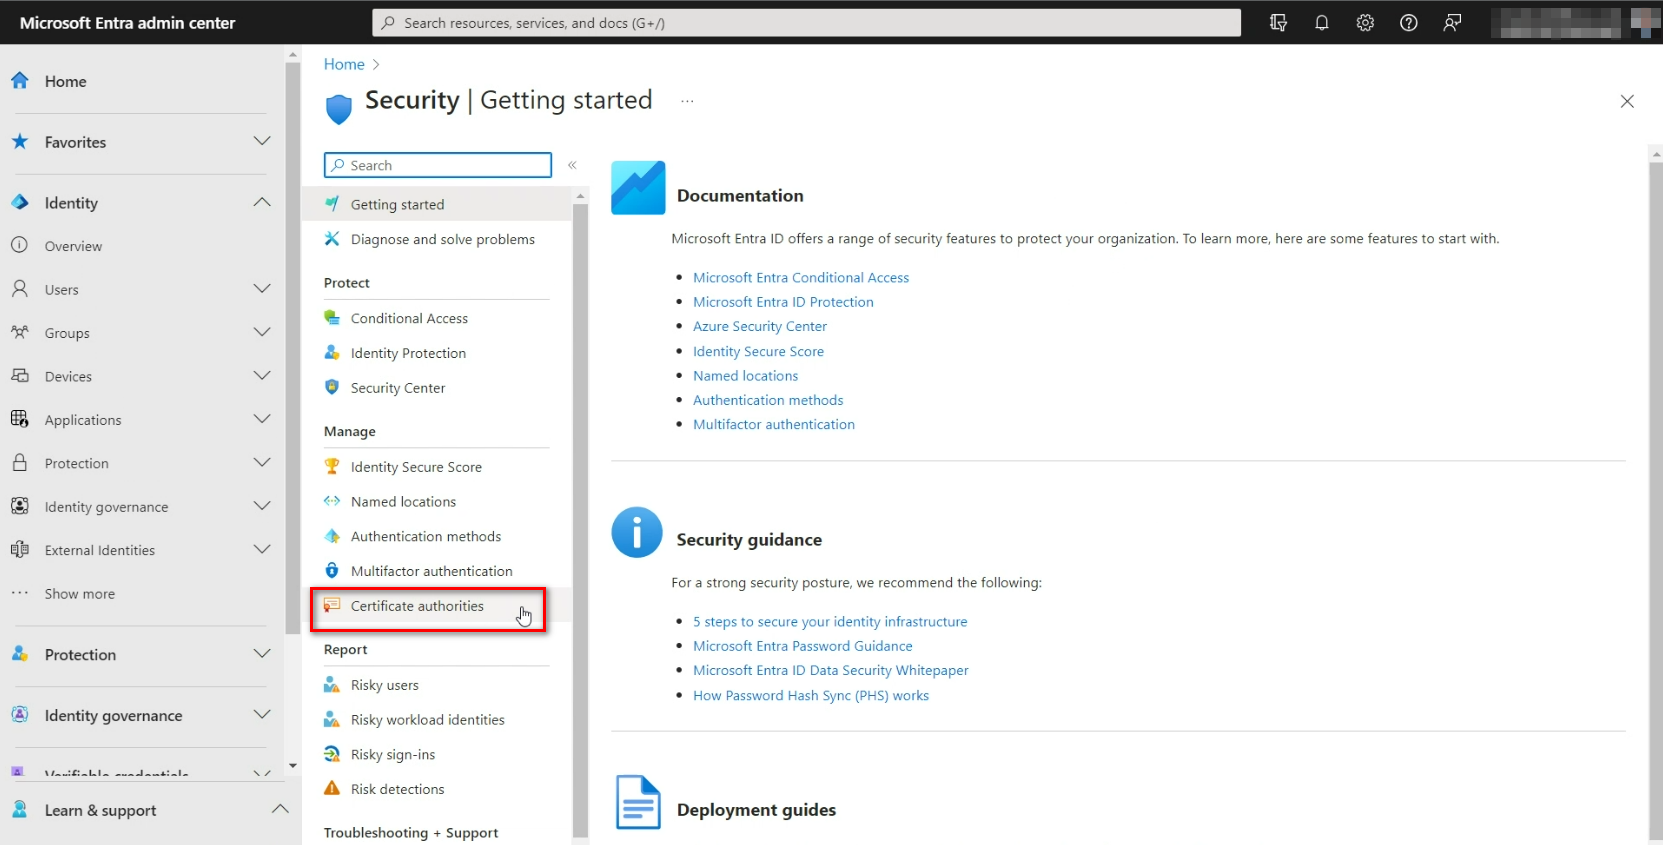 certificate authorities in Microsoft Entra admin center